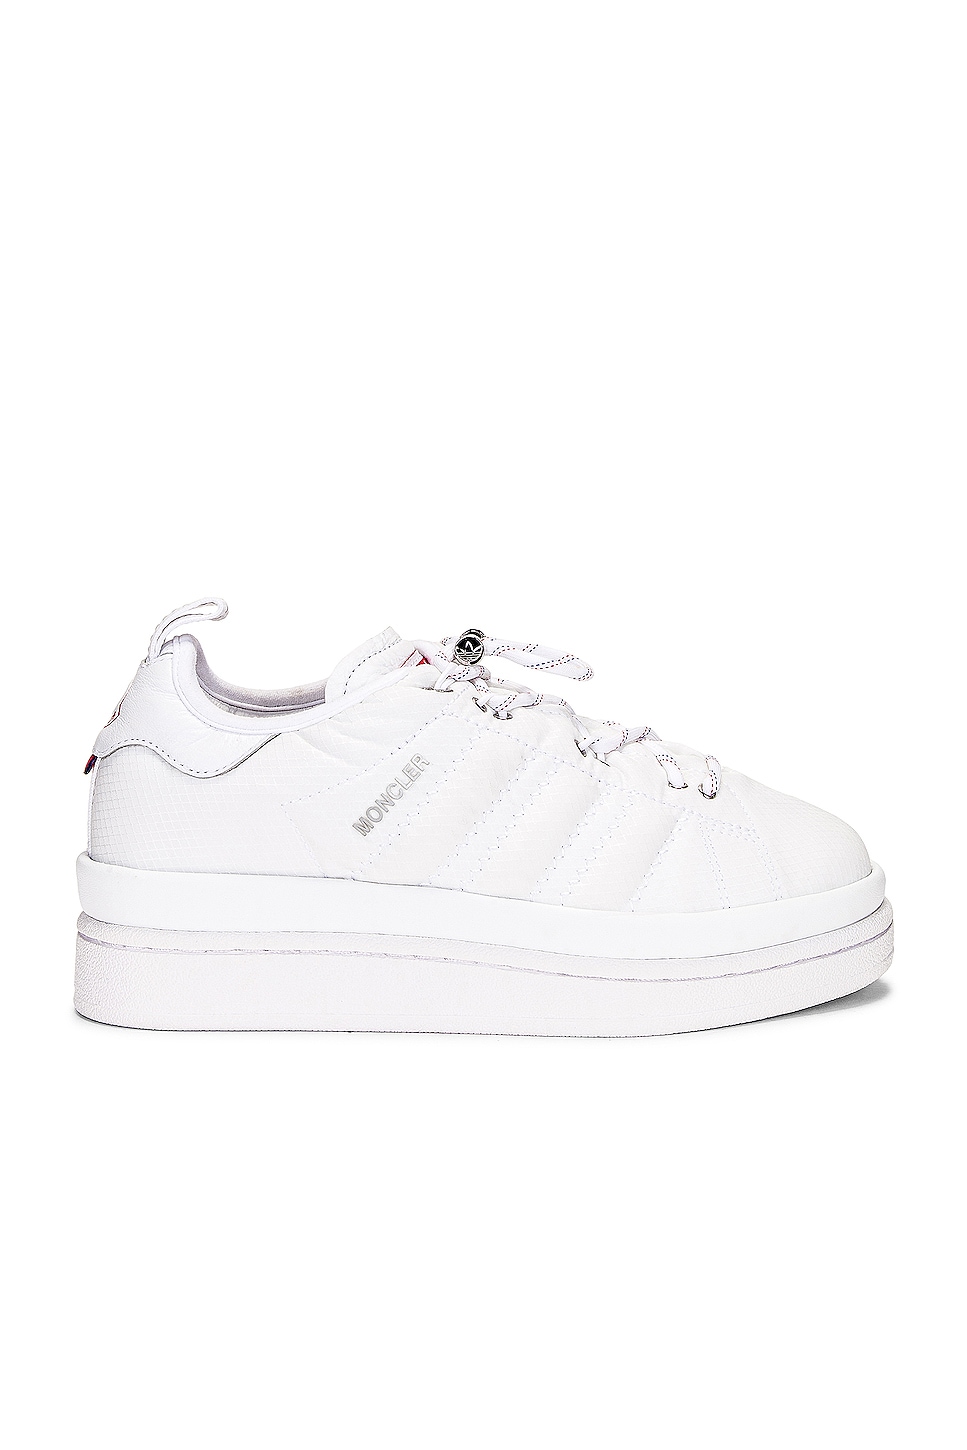 Image 1 of Moncler Genius x Adidas Campus Low Top Sneakers in White